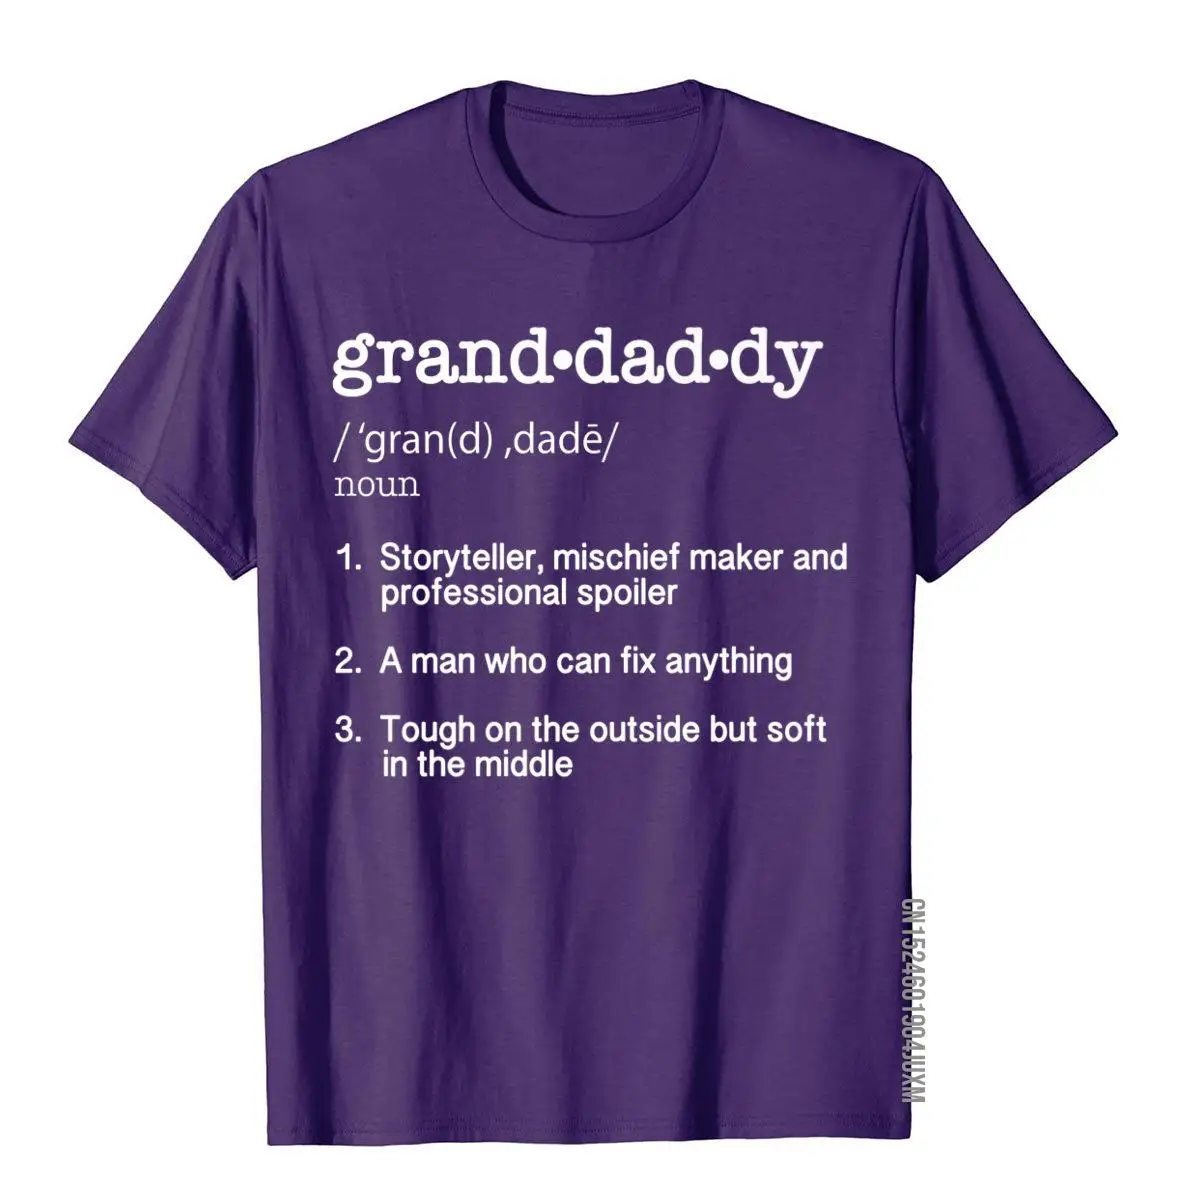 Granddaddy Definition T Shirt - Funny Cool Present Gift Tee__97A1084purple